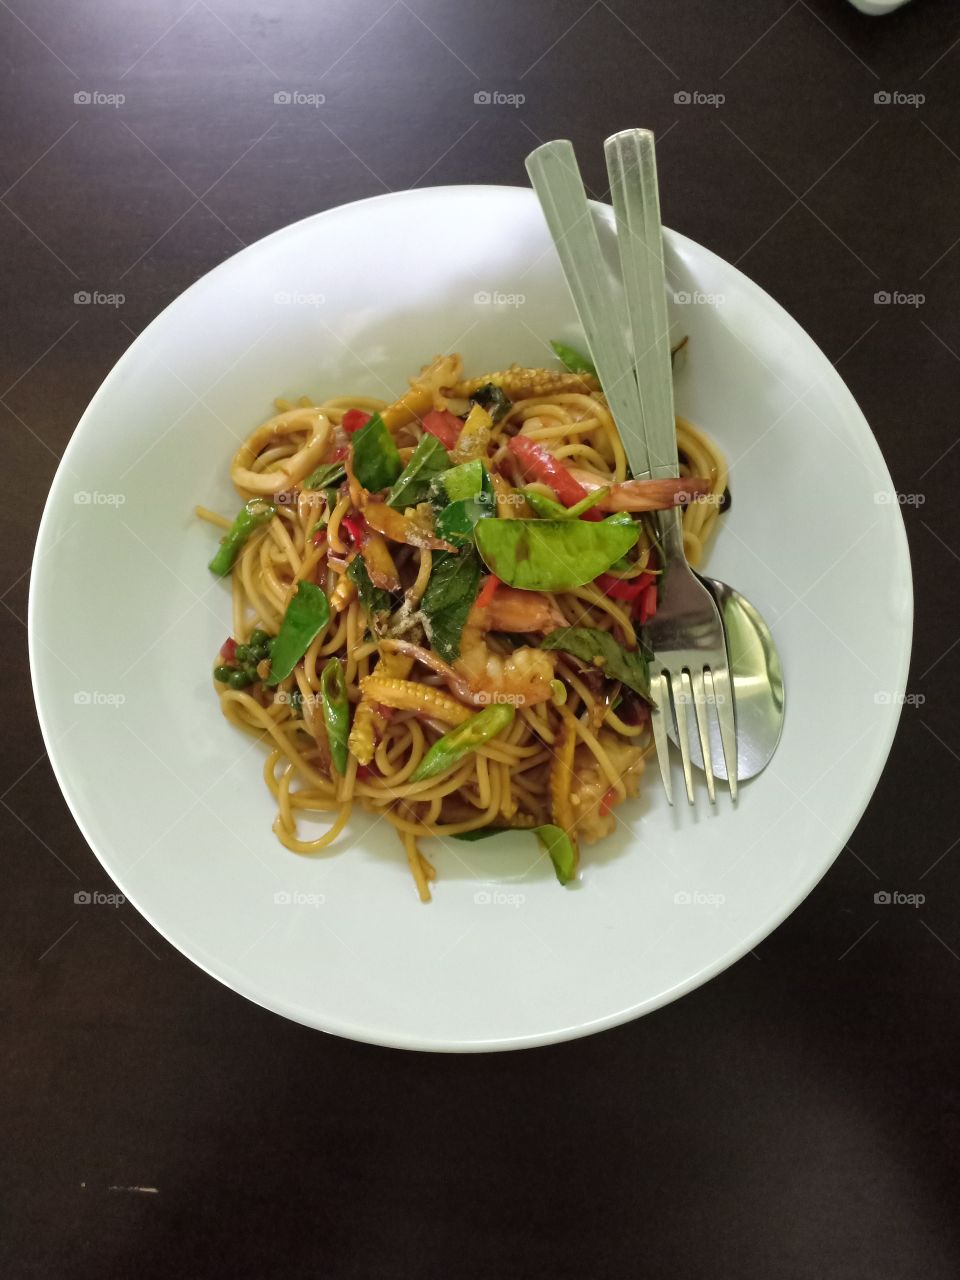 Spicy Stir Fried Spaghetti with Seafood  Savory food to try.